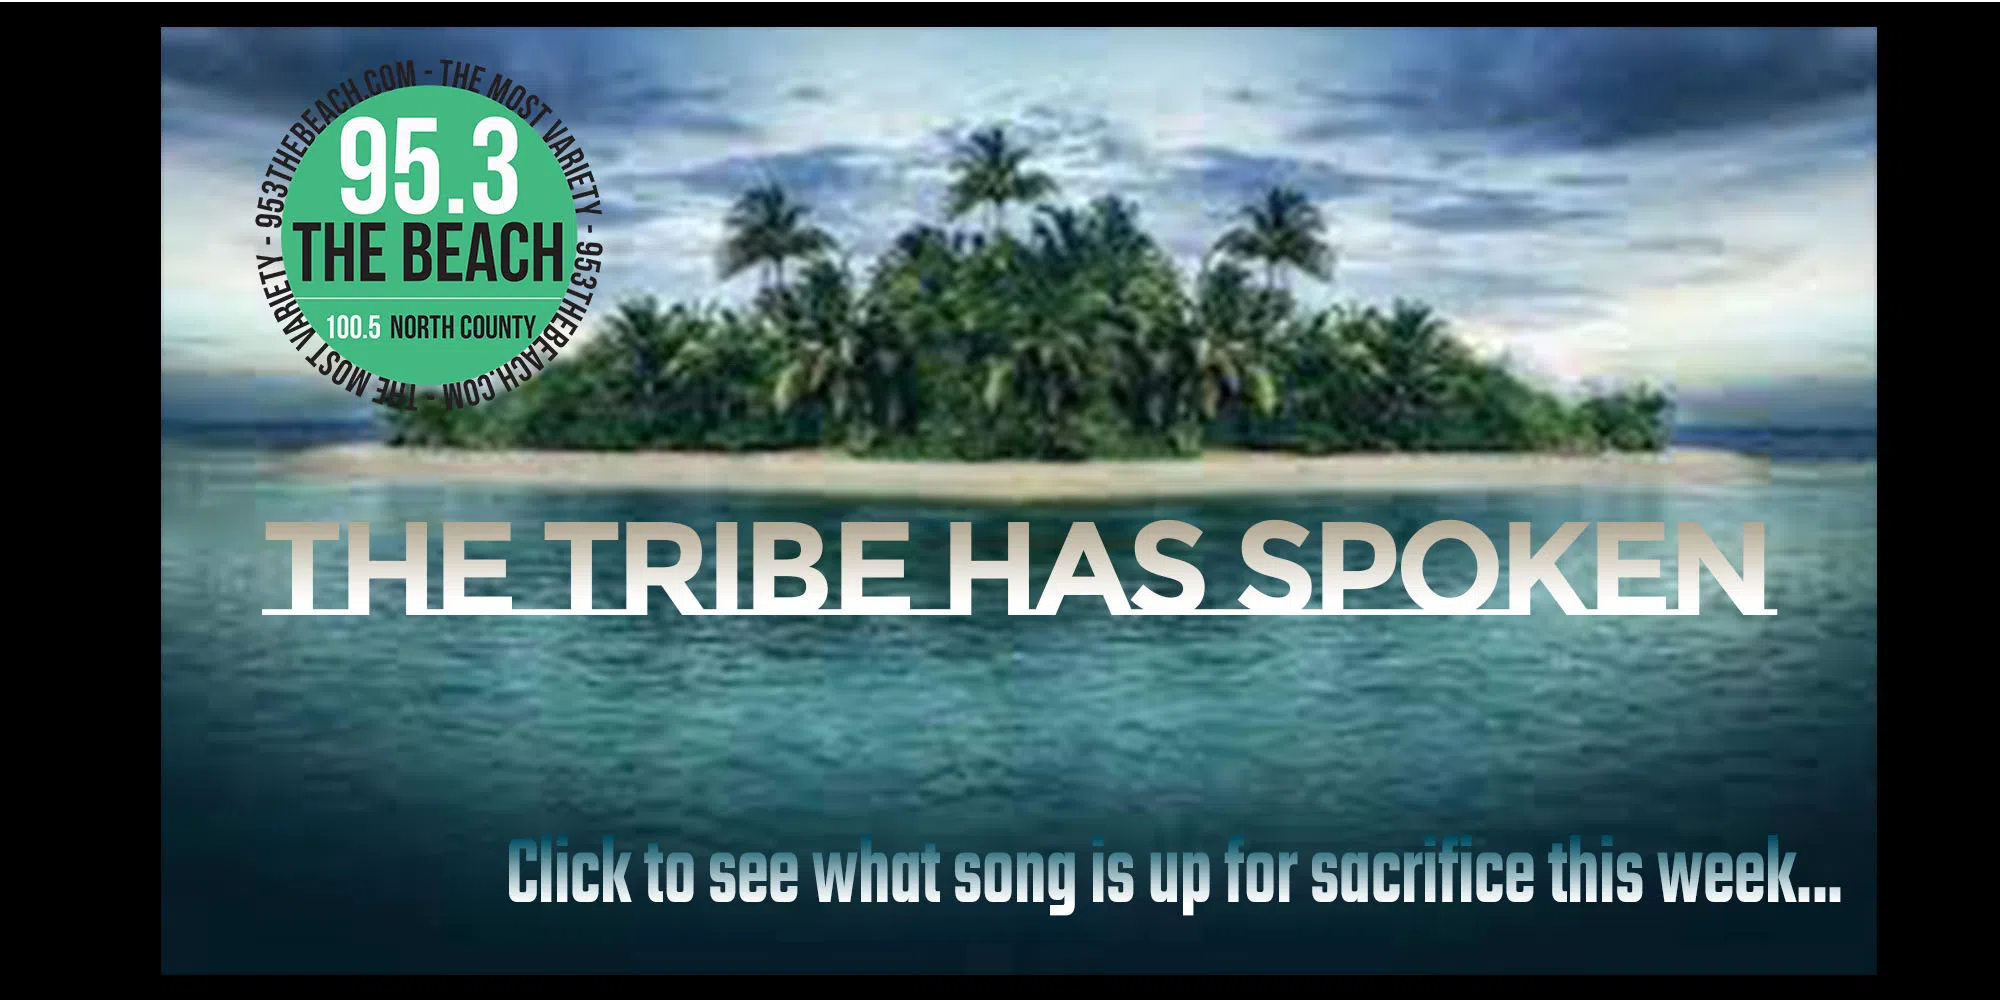 Feature: https://d2764.cms.socastsrm.com/the-tribe-has-spoken-on-95-3-the-beach/